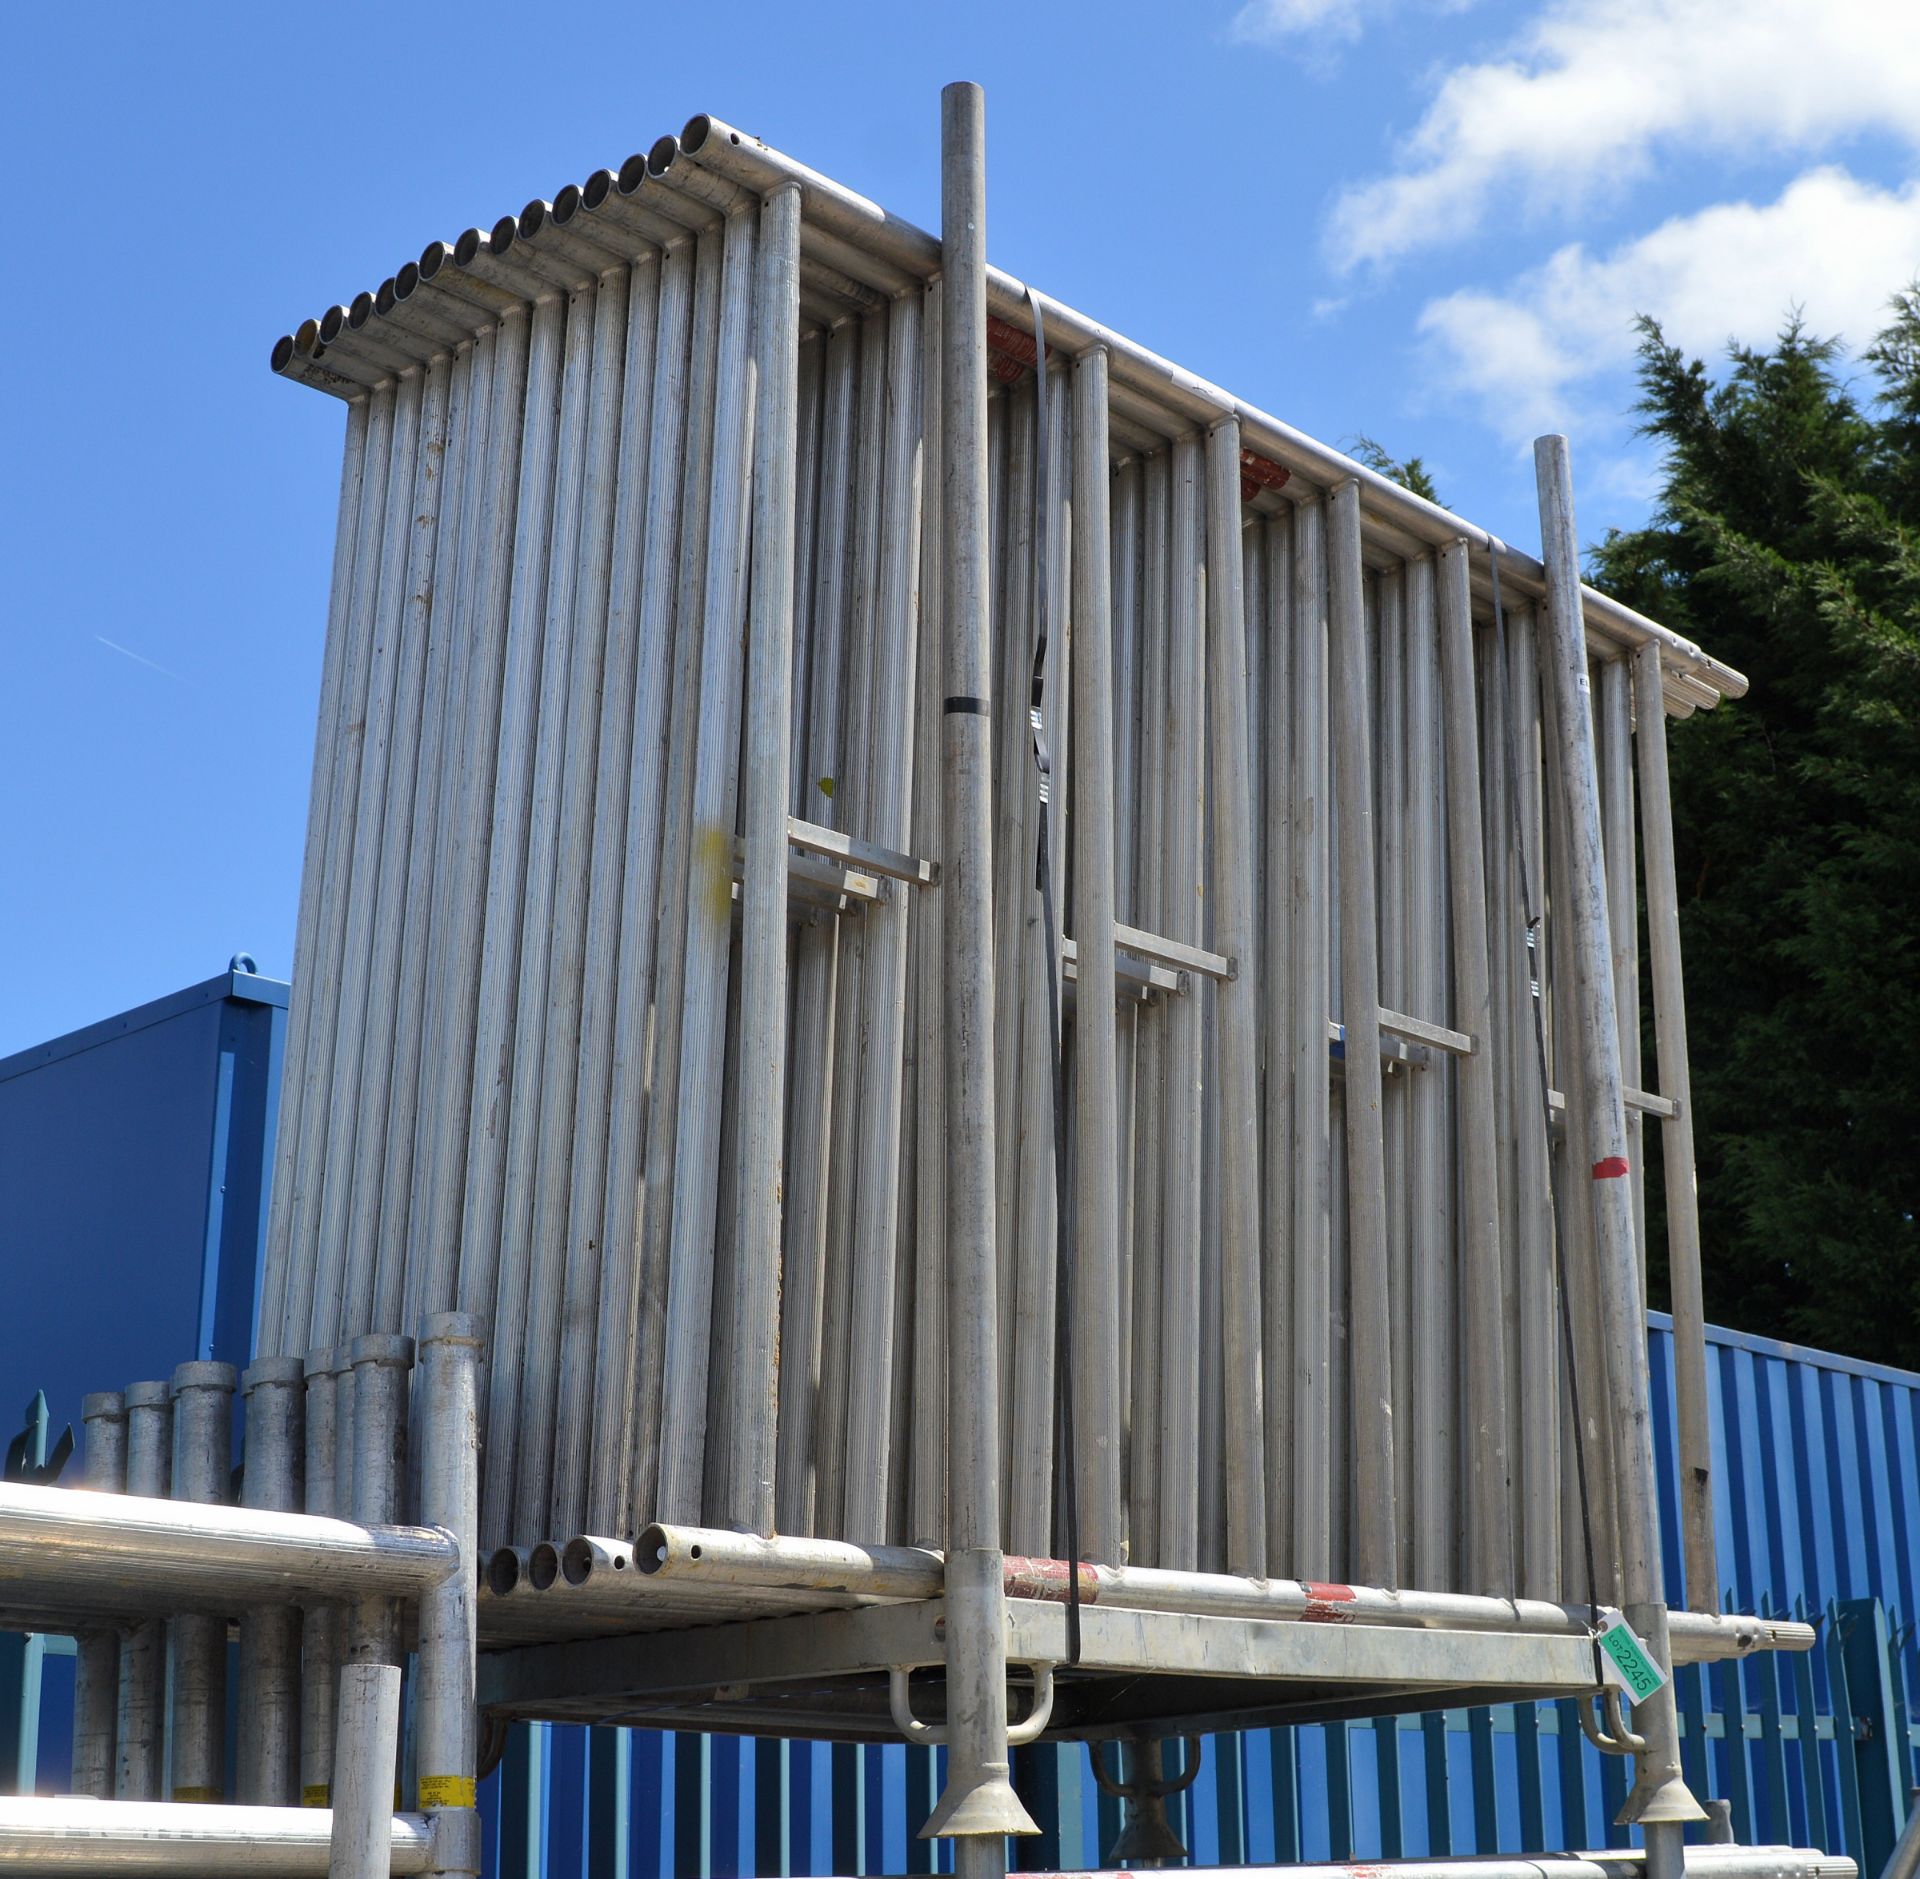 15x 2m Layher access tower frames - Image 3 of 3